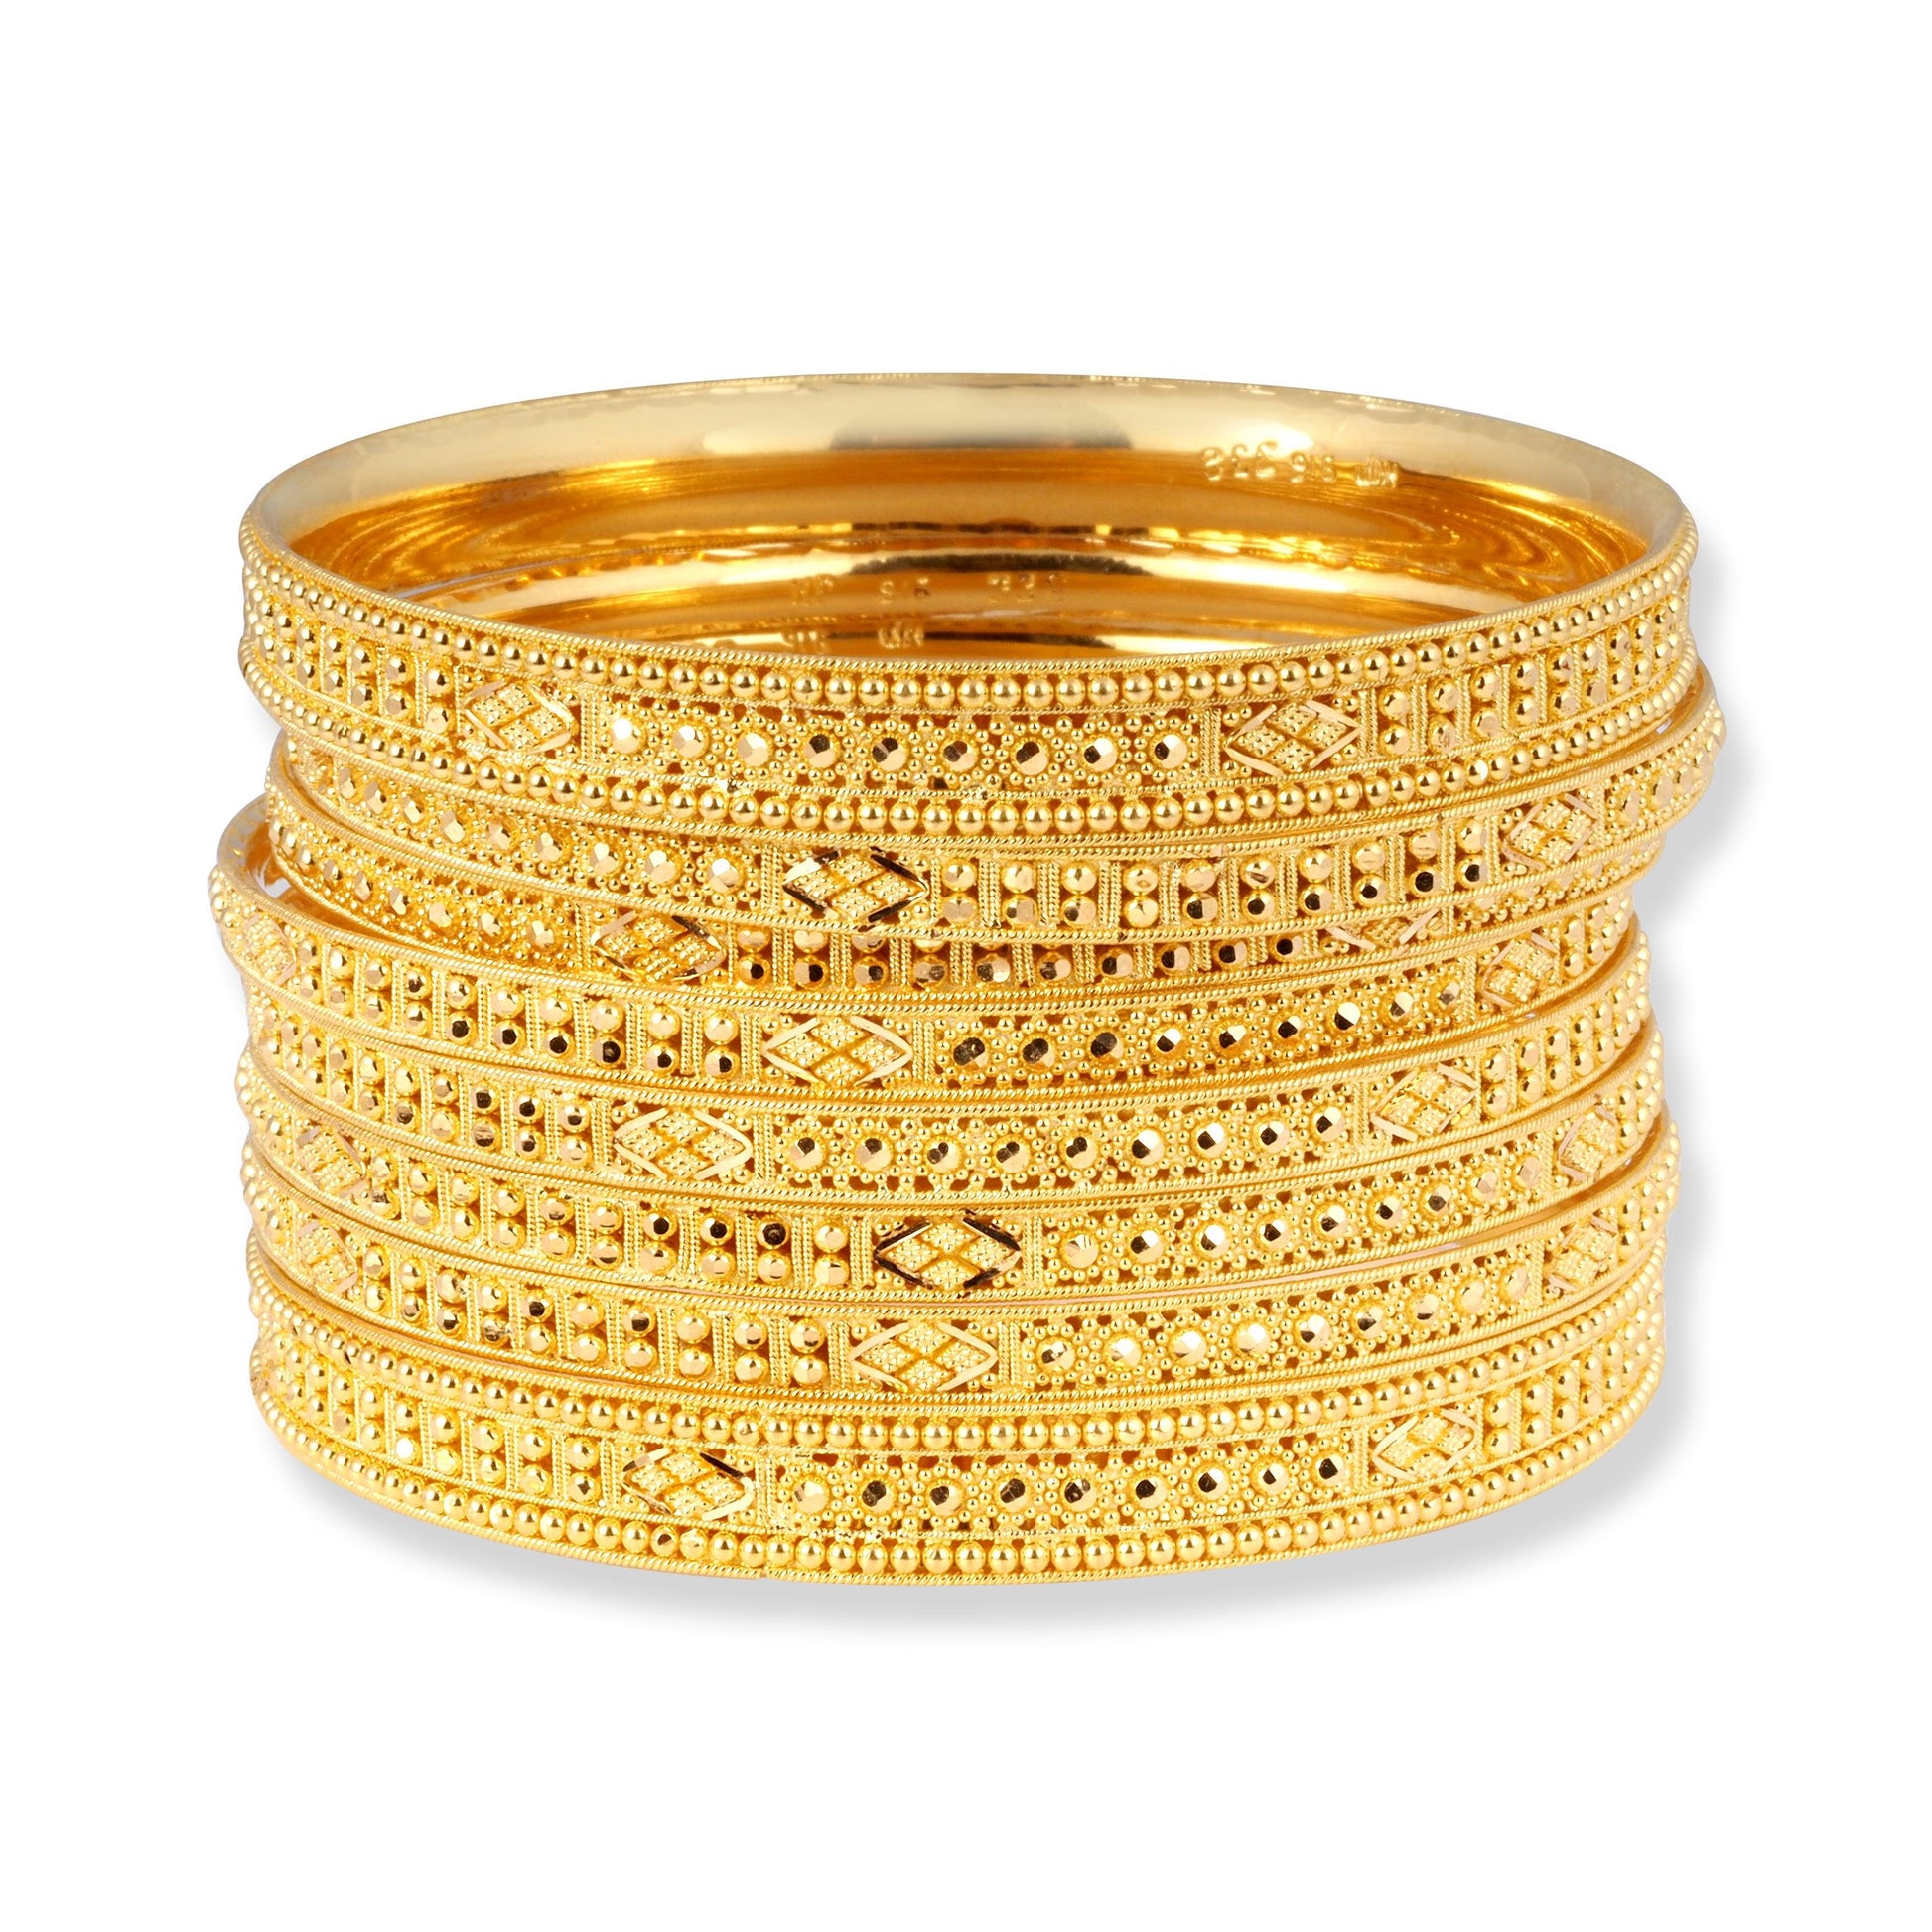 Set of Eight 22ct Gold Bangles with Diamond Cut Design and Filigree Work B-8576 - Minar Jewellers